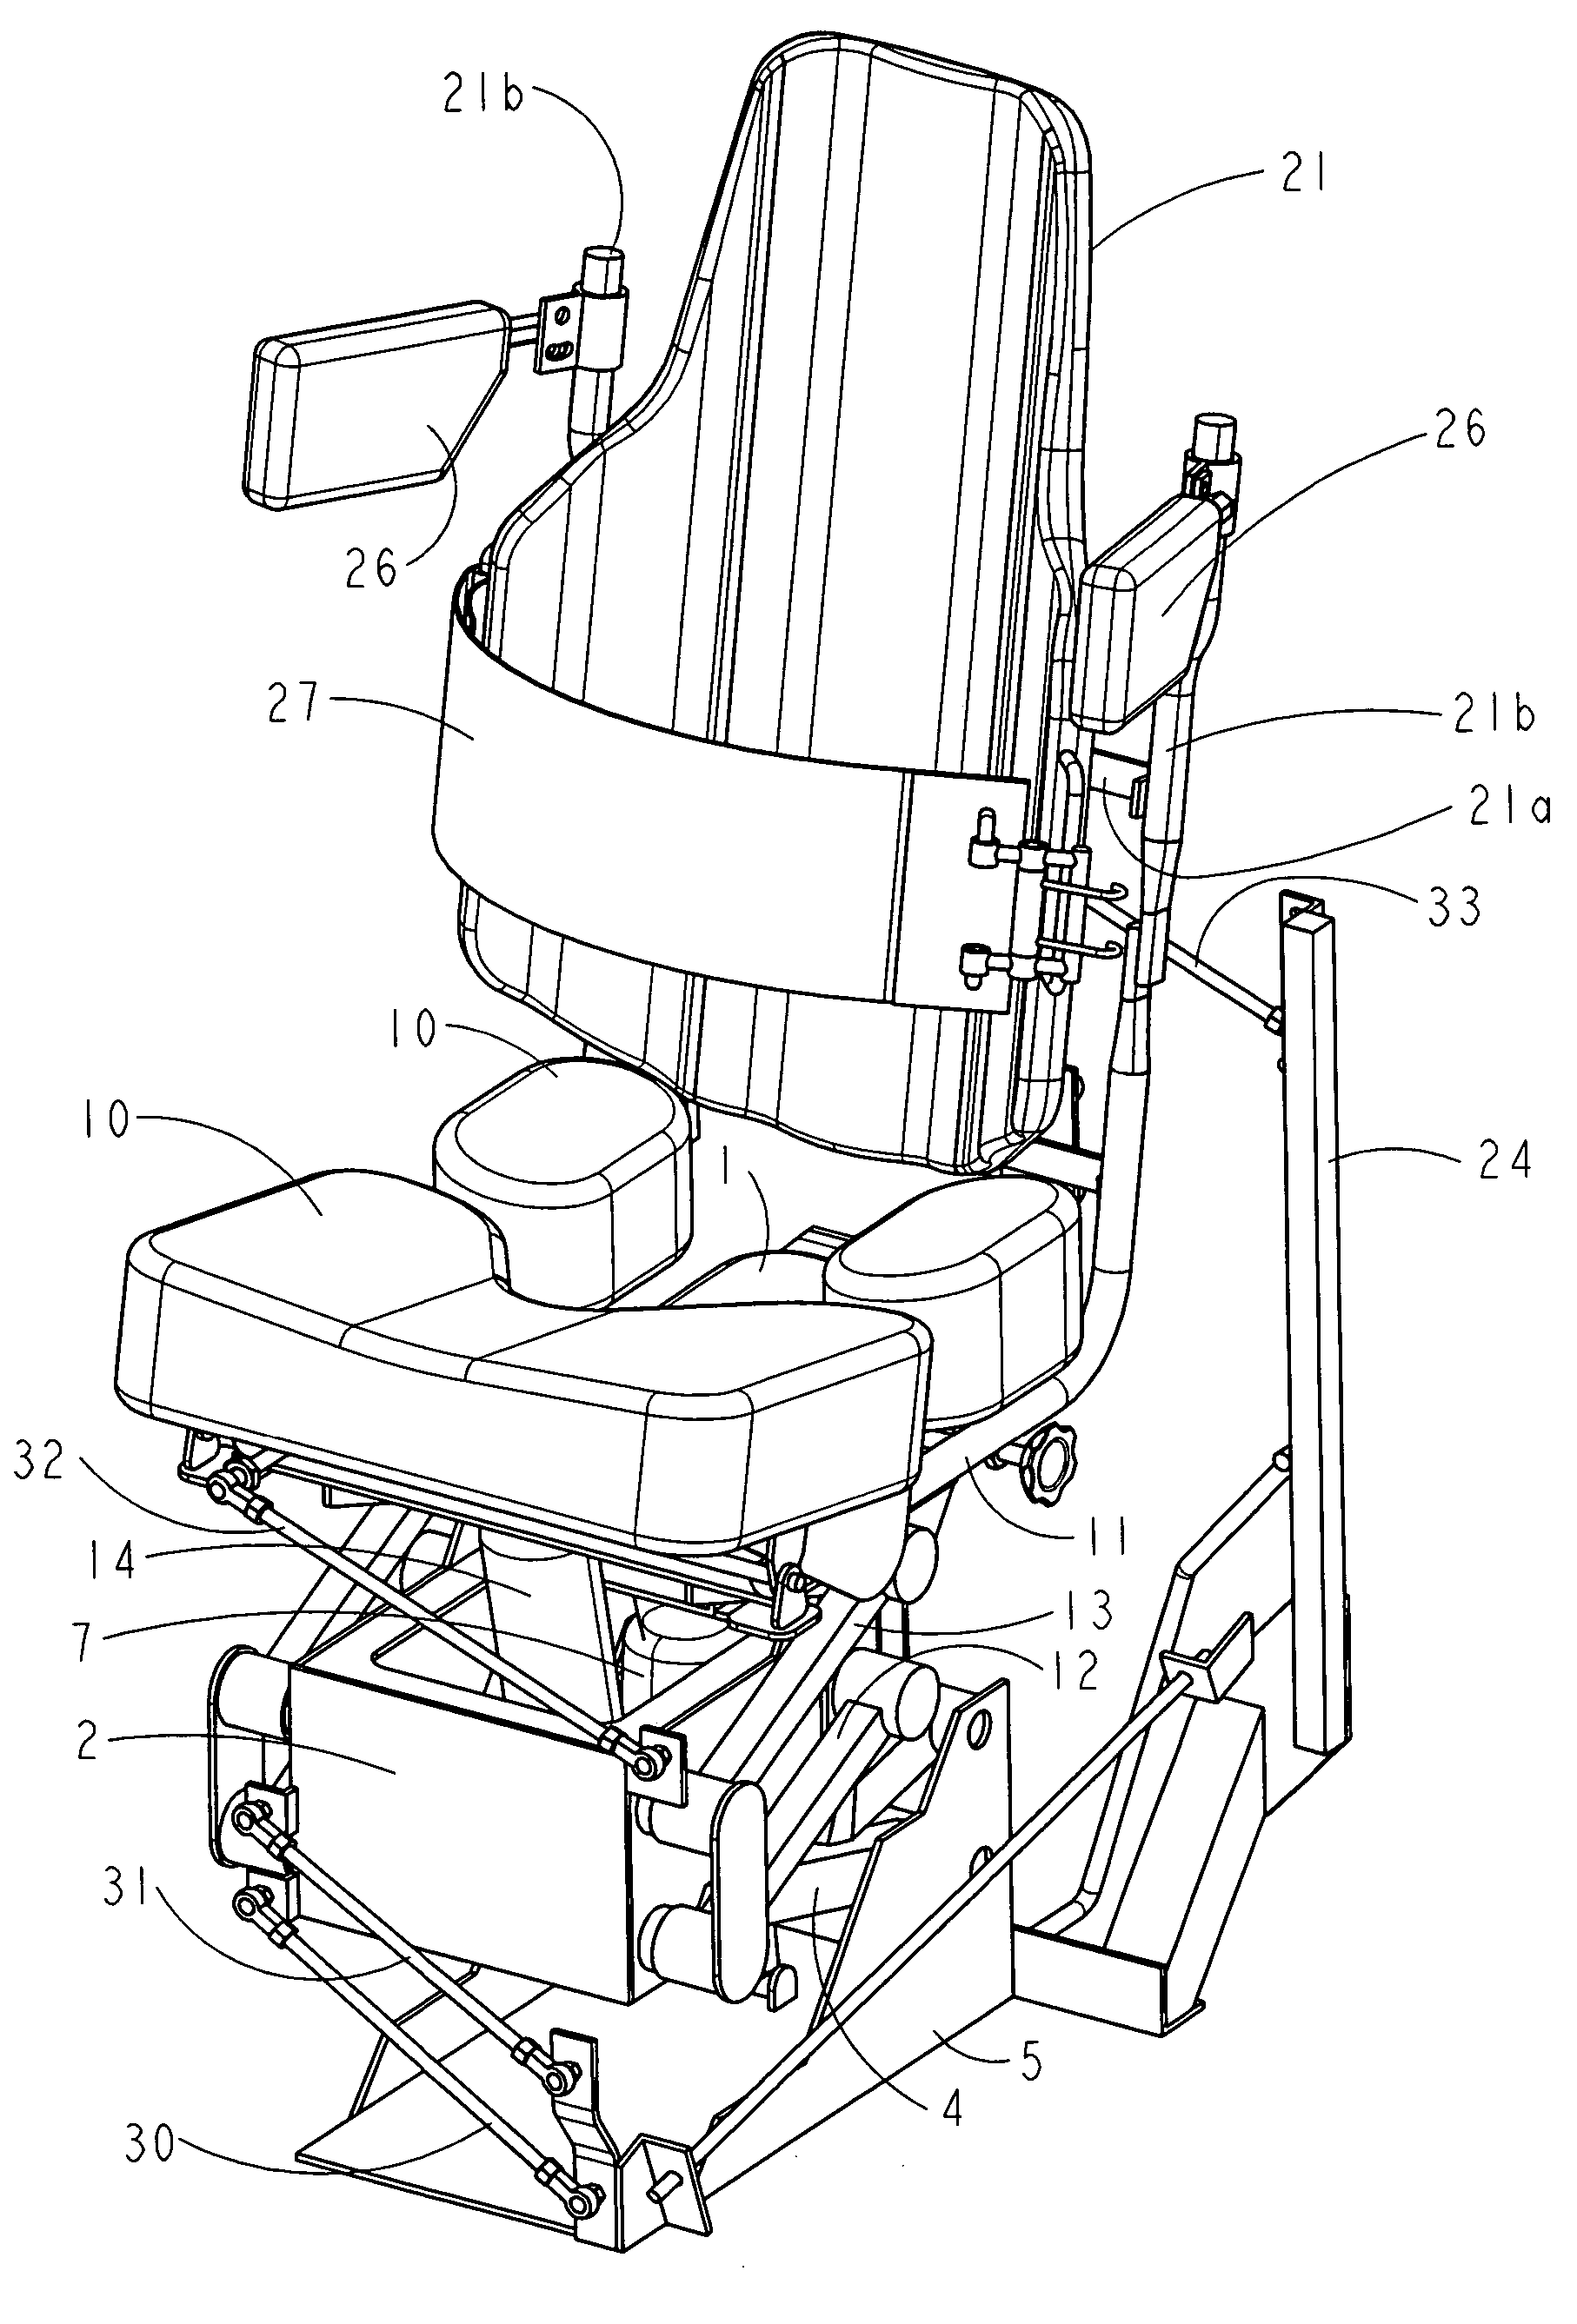 Vehicle seat with dual independently adjustable supports